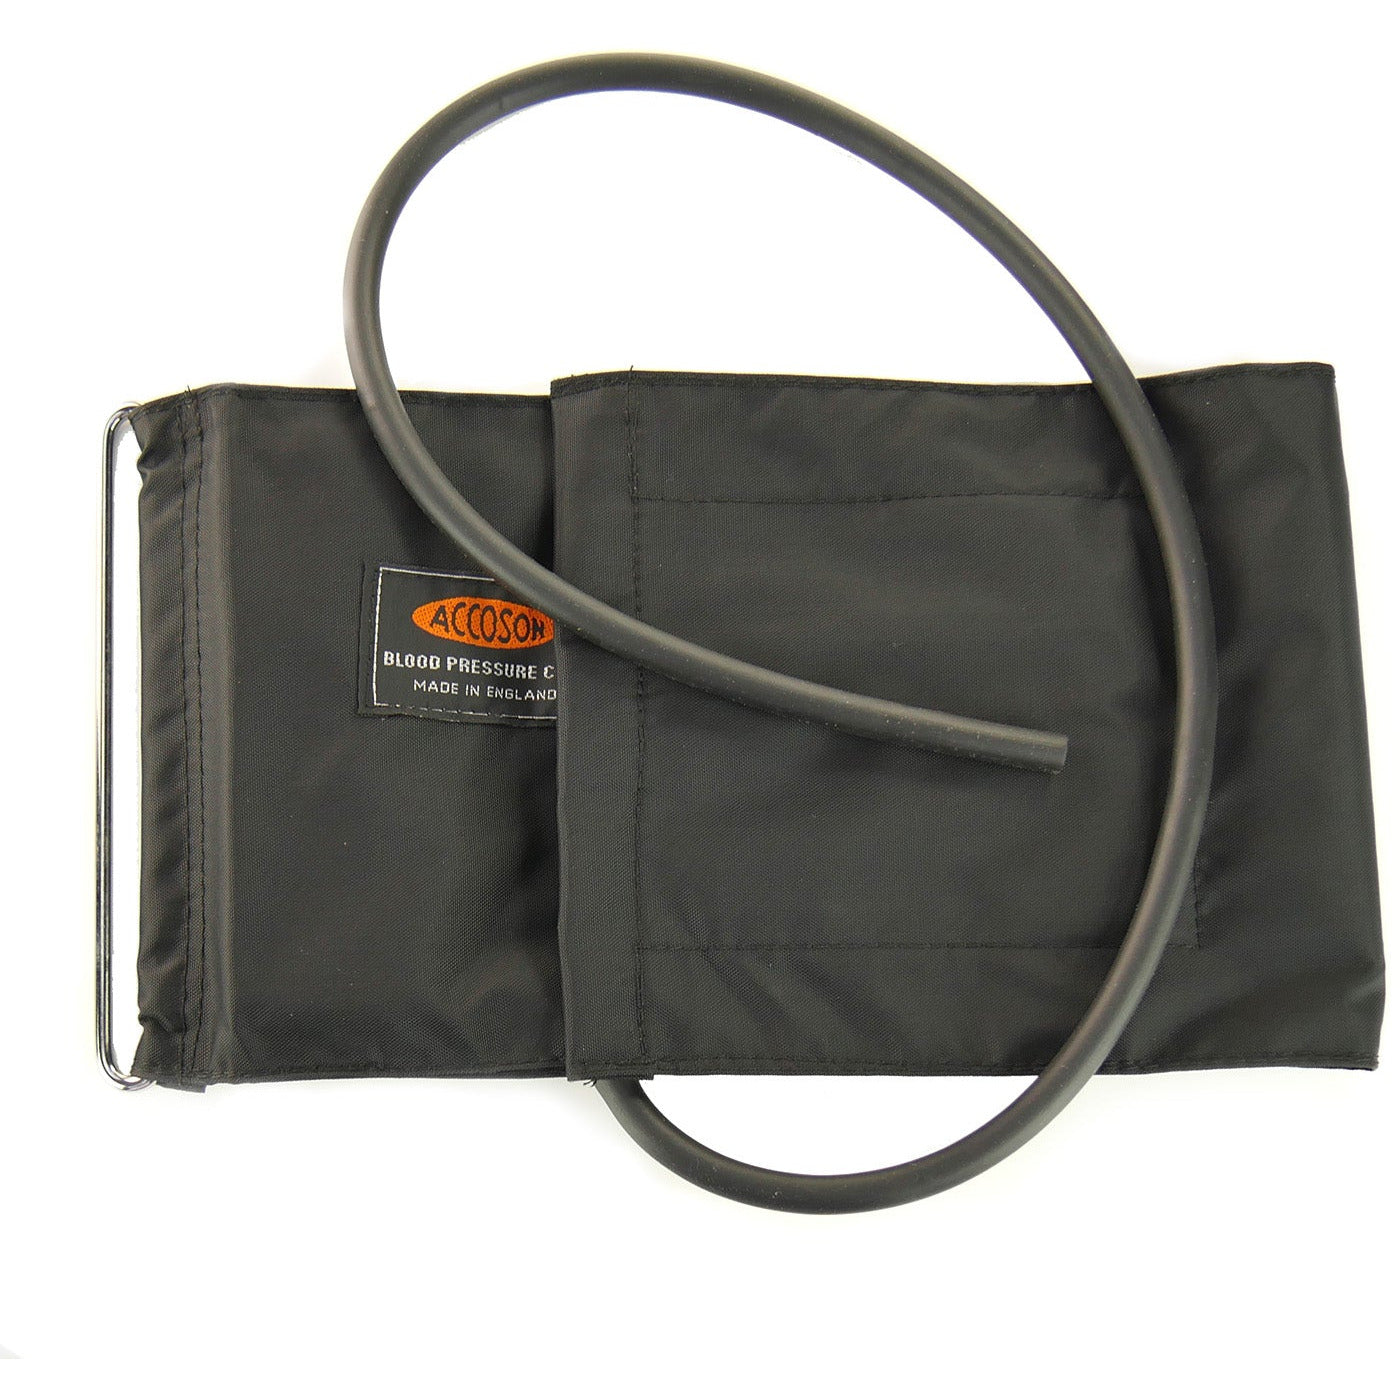 Accoson COMBINE CUFF with Inflation Bag